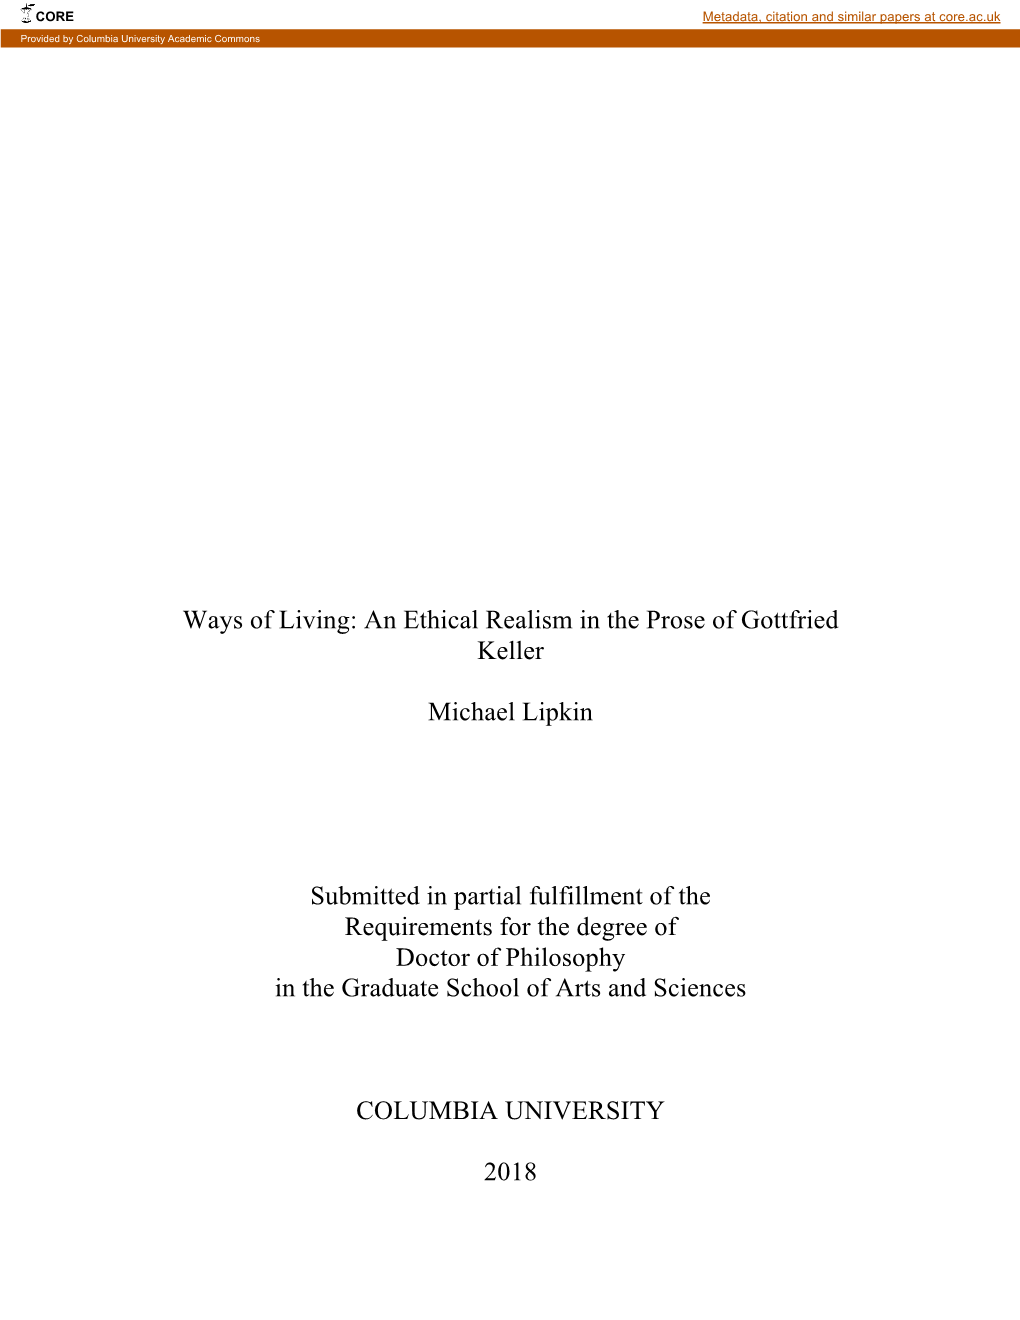 An Ethical Realism in the Prose of Gottfried Keller Michael